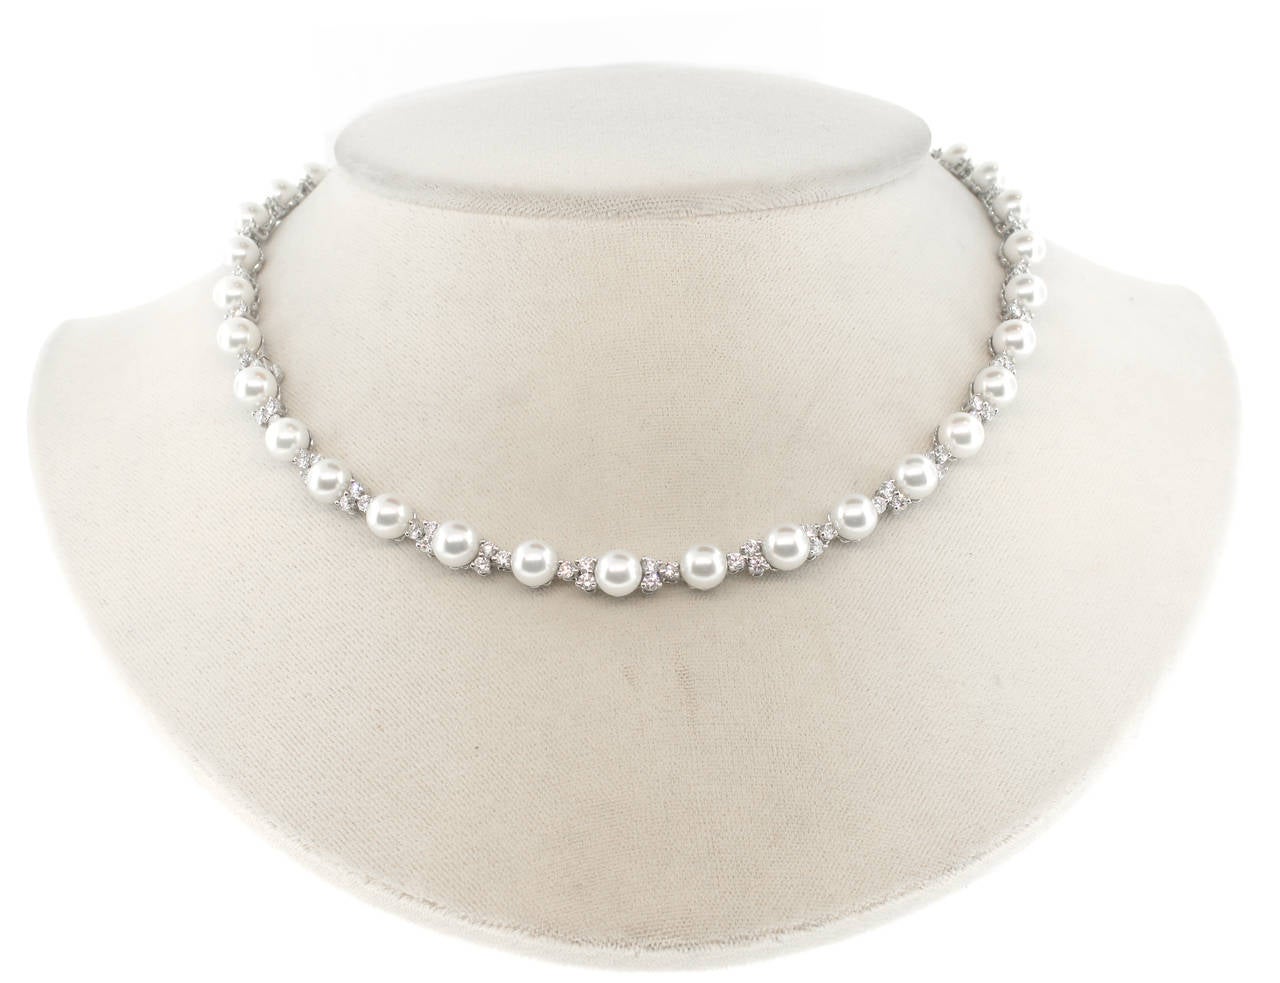 Three brilliant diamonds set in perfect harmony. A necklace of thirty-six  6.5-7 mm Akoya cultured pearls and 108 round brilliant diamonds weighing 4.91 carats.  Set platinum. 16